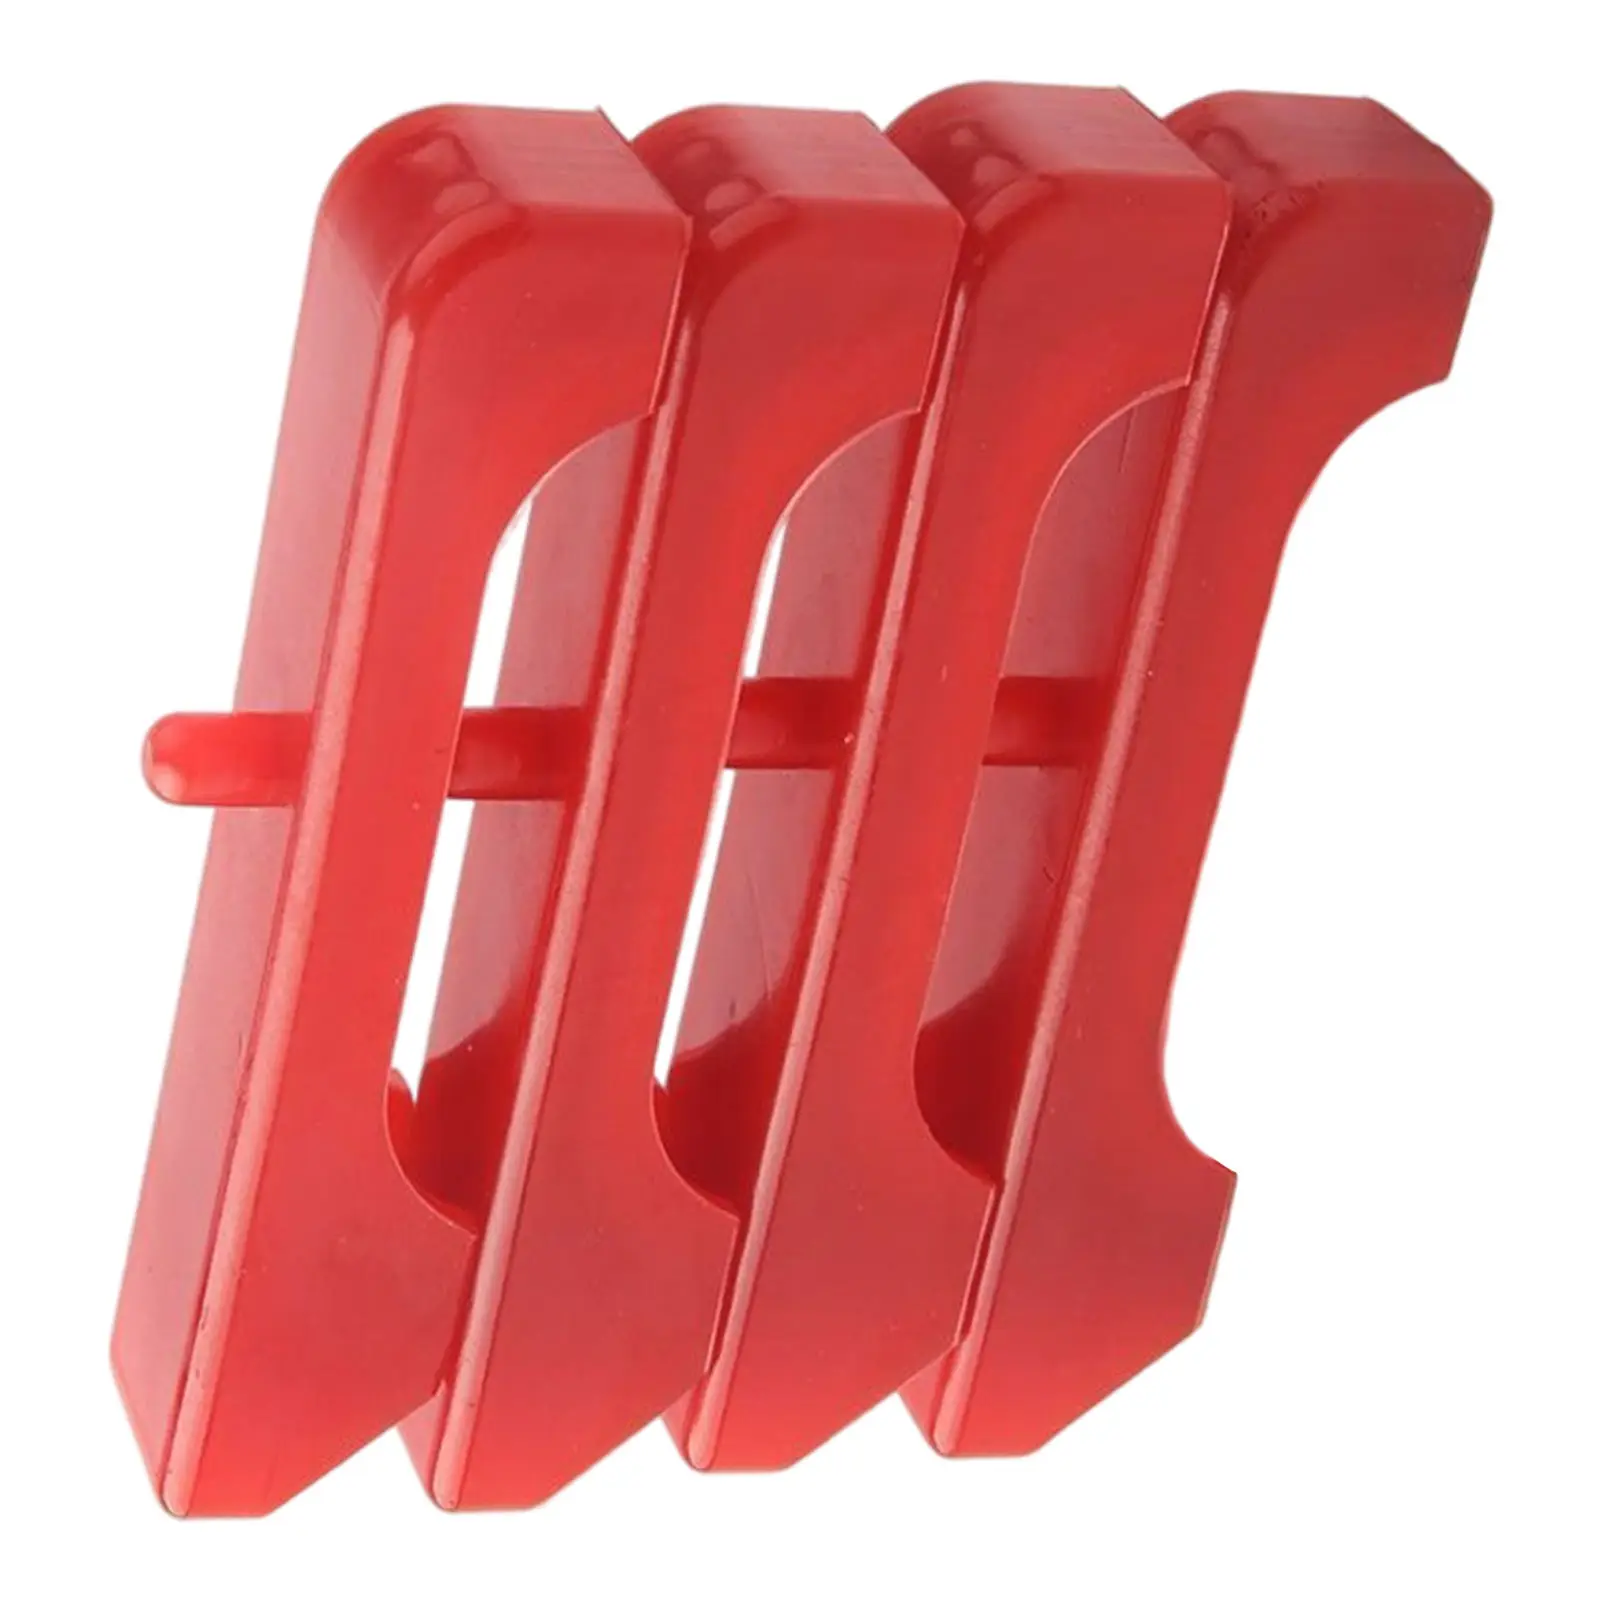 4x Auto Engine Radiator Insolators 7-1711 Direct Replacement Portable Accessory Red Urethane Fits for General Motor Vehicle